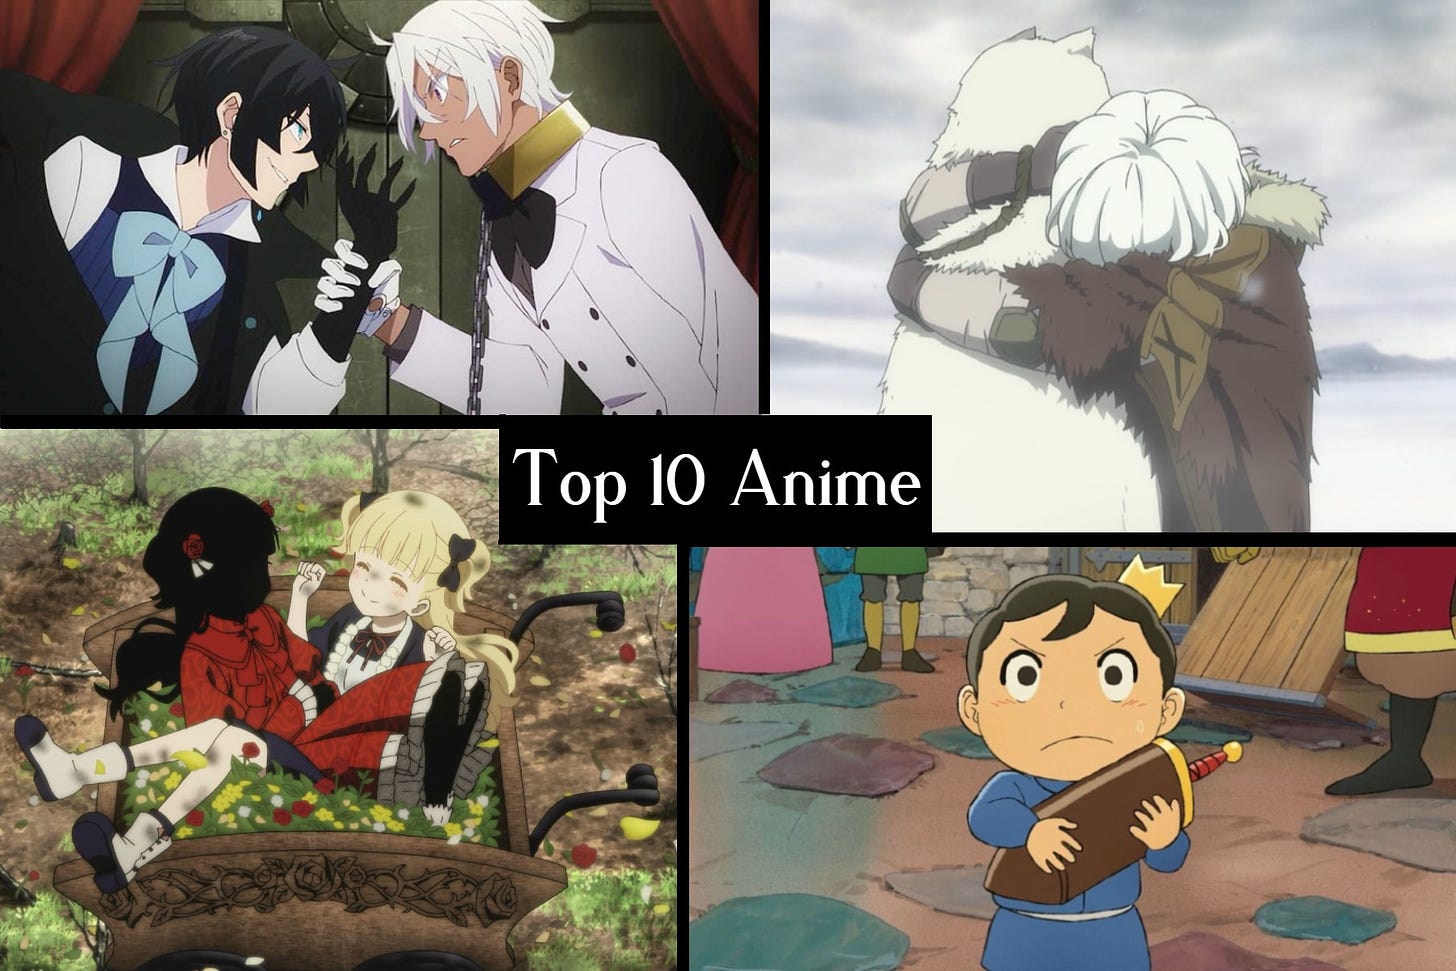 Top 10 Anime of 2021 - by John Wintroub - The Rich Report